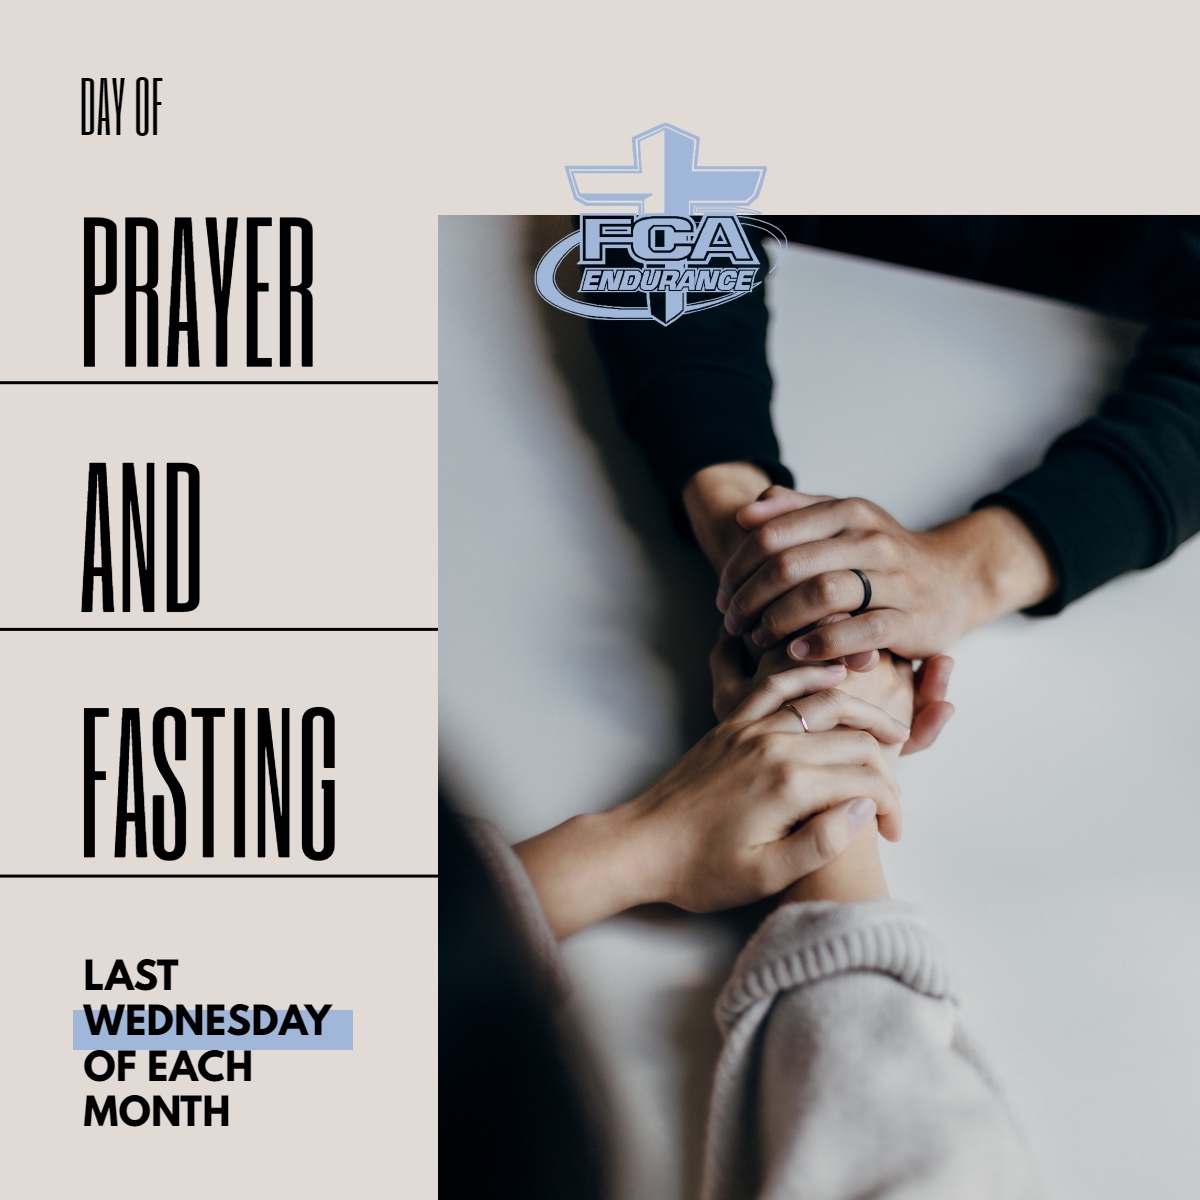 This Wednesday is our monthly Day of Prayer and Fasting. In your prayers, please include the FCA Endurance ministry as we show #WhyDoYouRace. Your fast can either be food, or something else that could be given up in an effort to focus more of your attention on the Lord.